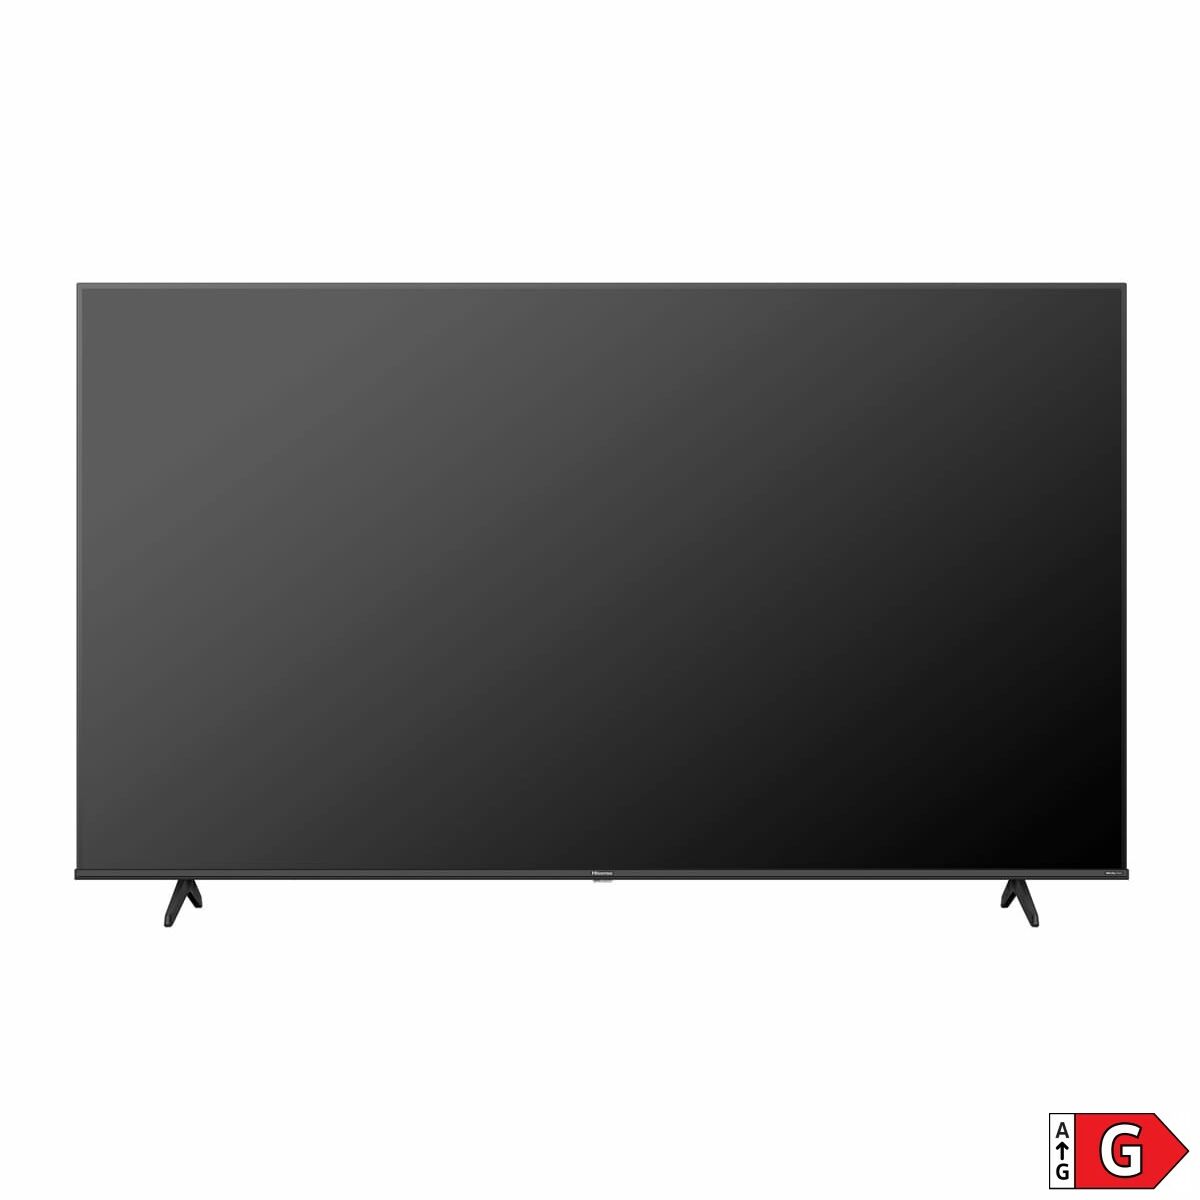 Smart TV Hisense 55A6K 55" LED 4K Ultra HD, Hisense, Electronics, Portable audio and video, smart-tv-hisense-55a6k-55-led-4k-ultra-hd-1, Brand_Hisense, category-reference-2609, category-reference-2625, category-reference-2931, category-reference-t-1938, category-reference-t-19653, category-reference-t-1967, cinema and television, Condition_NEW, entertainment, Price_400 - 500, RiotNook